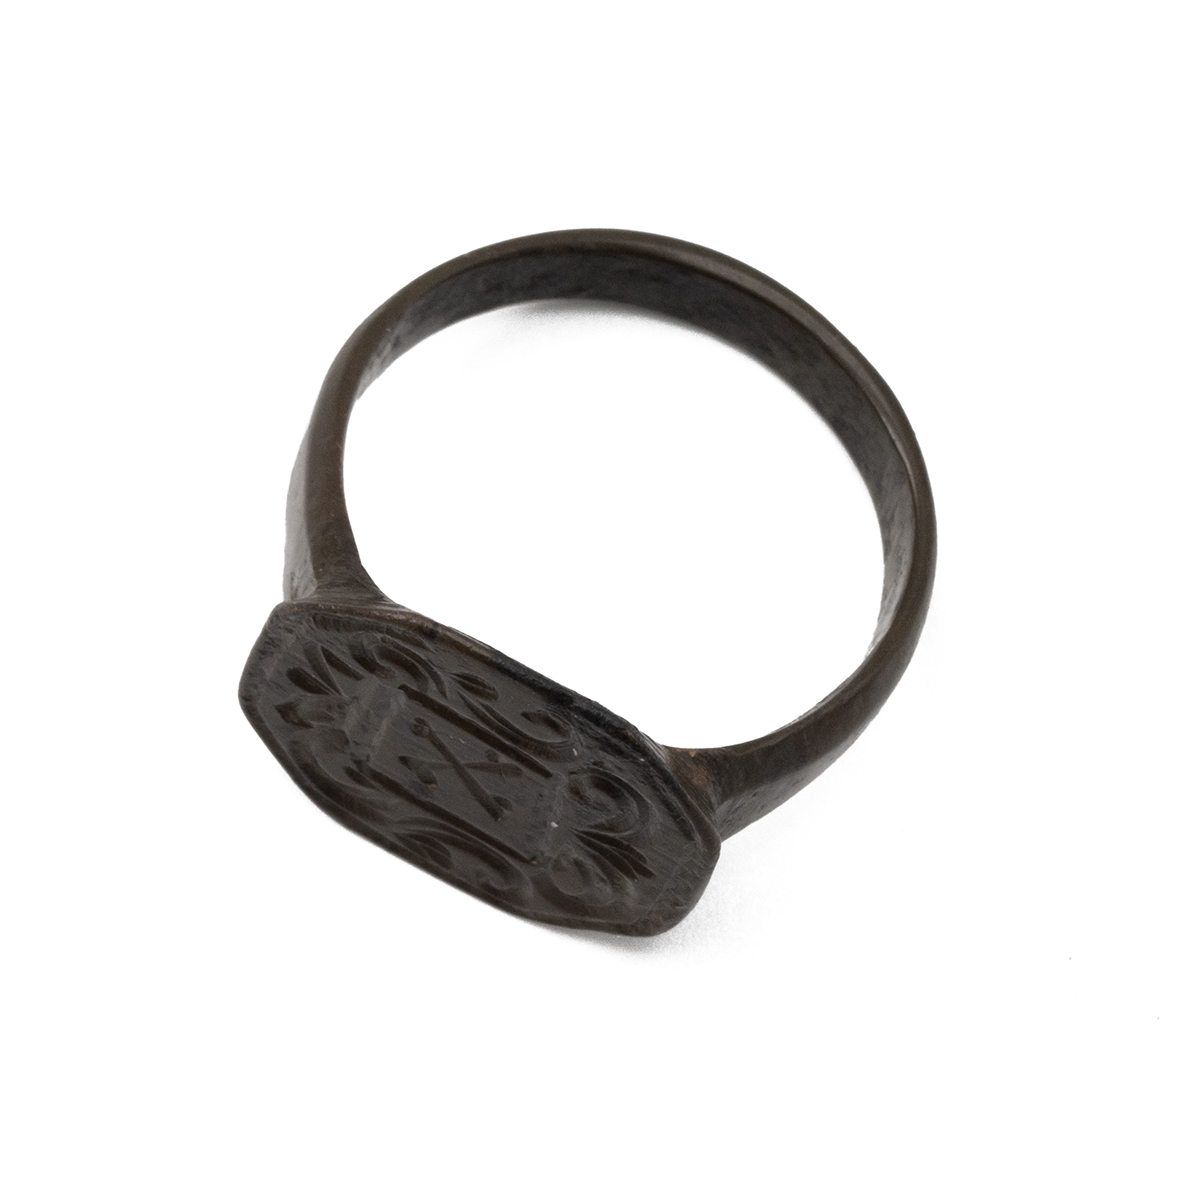 Bronze merchants ring with inscribed cross keys motif and scroll design on a chamfered square pan... - Image 2 of 3